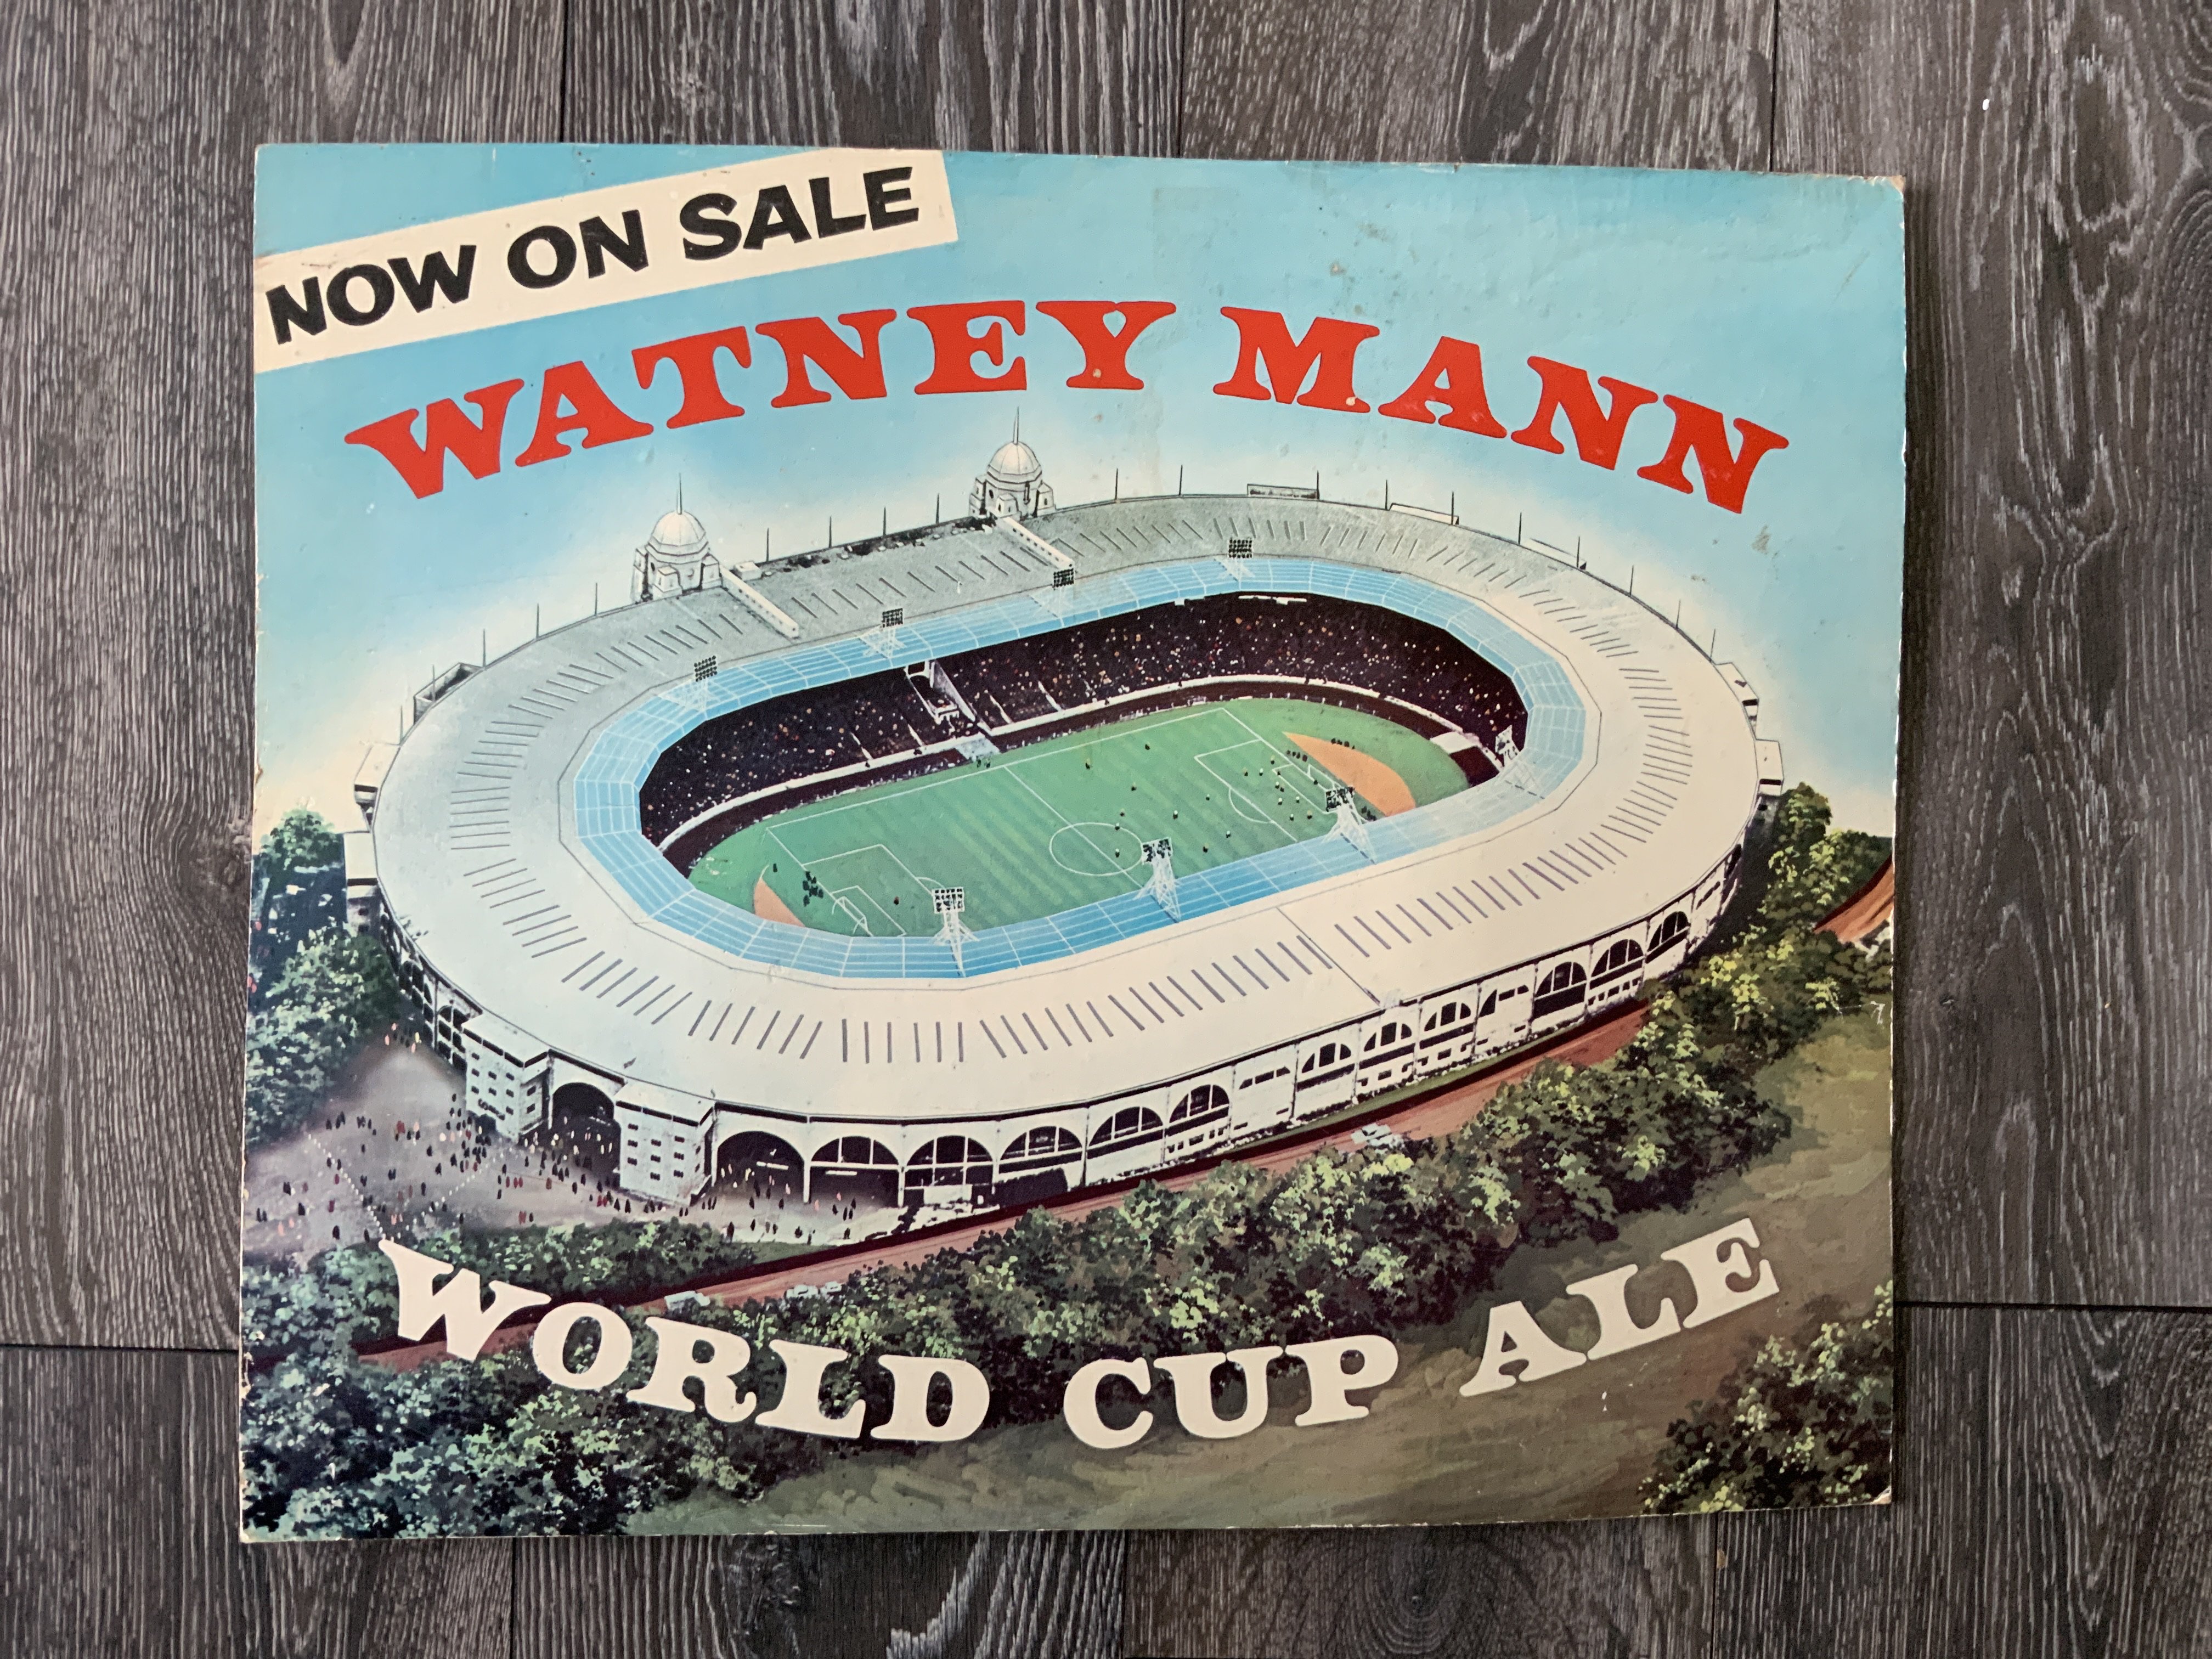 1966 Football World Cup Ale Sign + Full Bottles: W